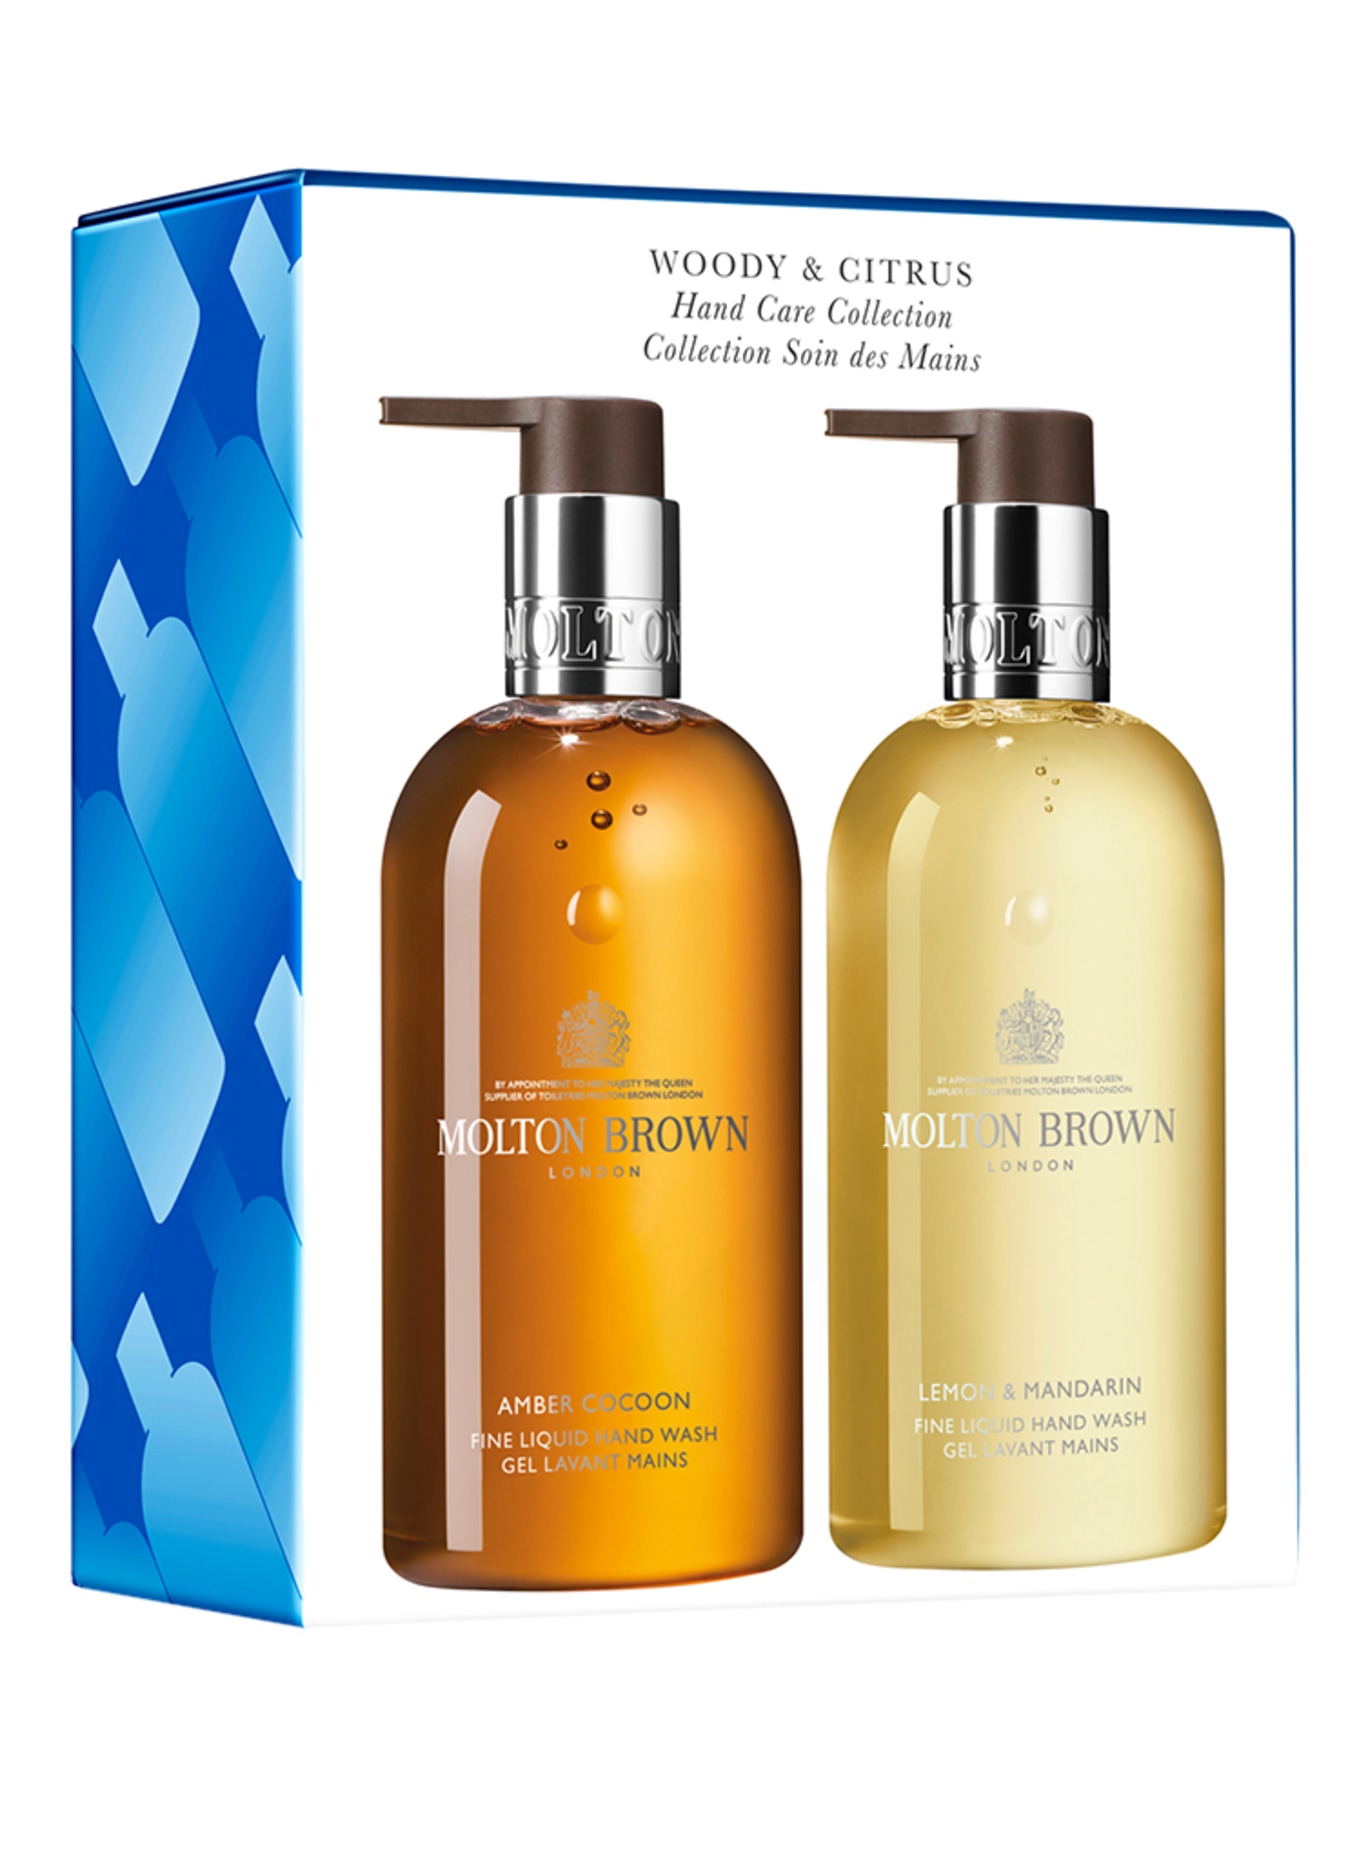 MOLTON BROWN WOODY & CITRUS HAND CARE COLLECTION (Obrazek 1)